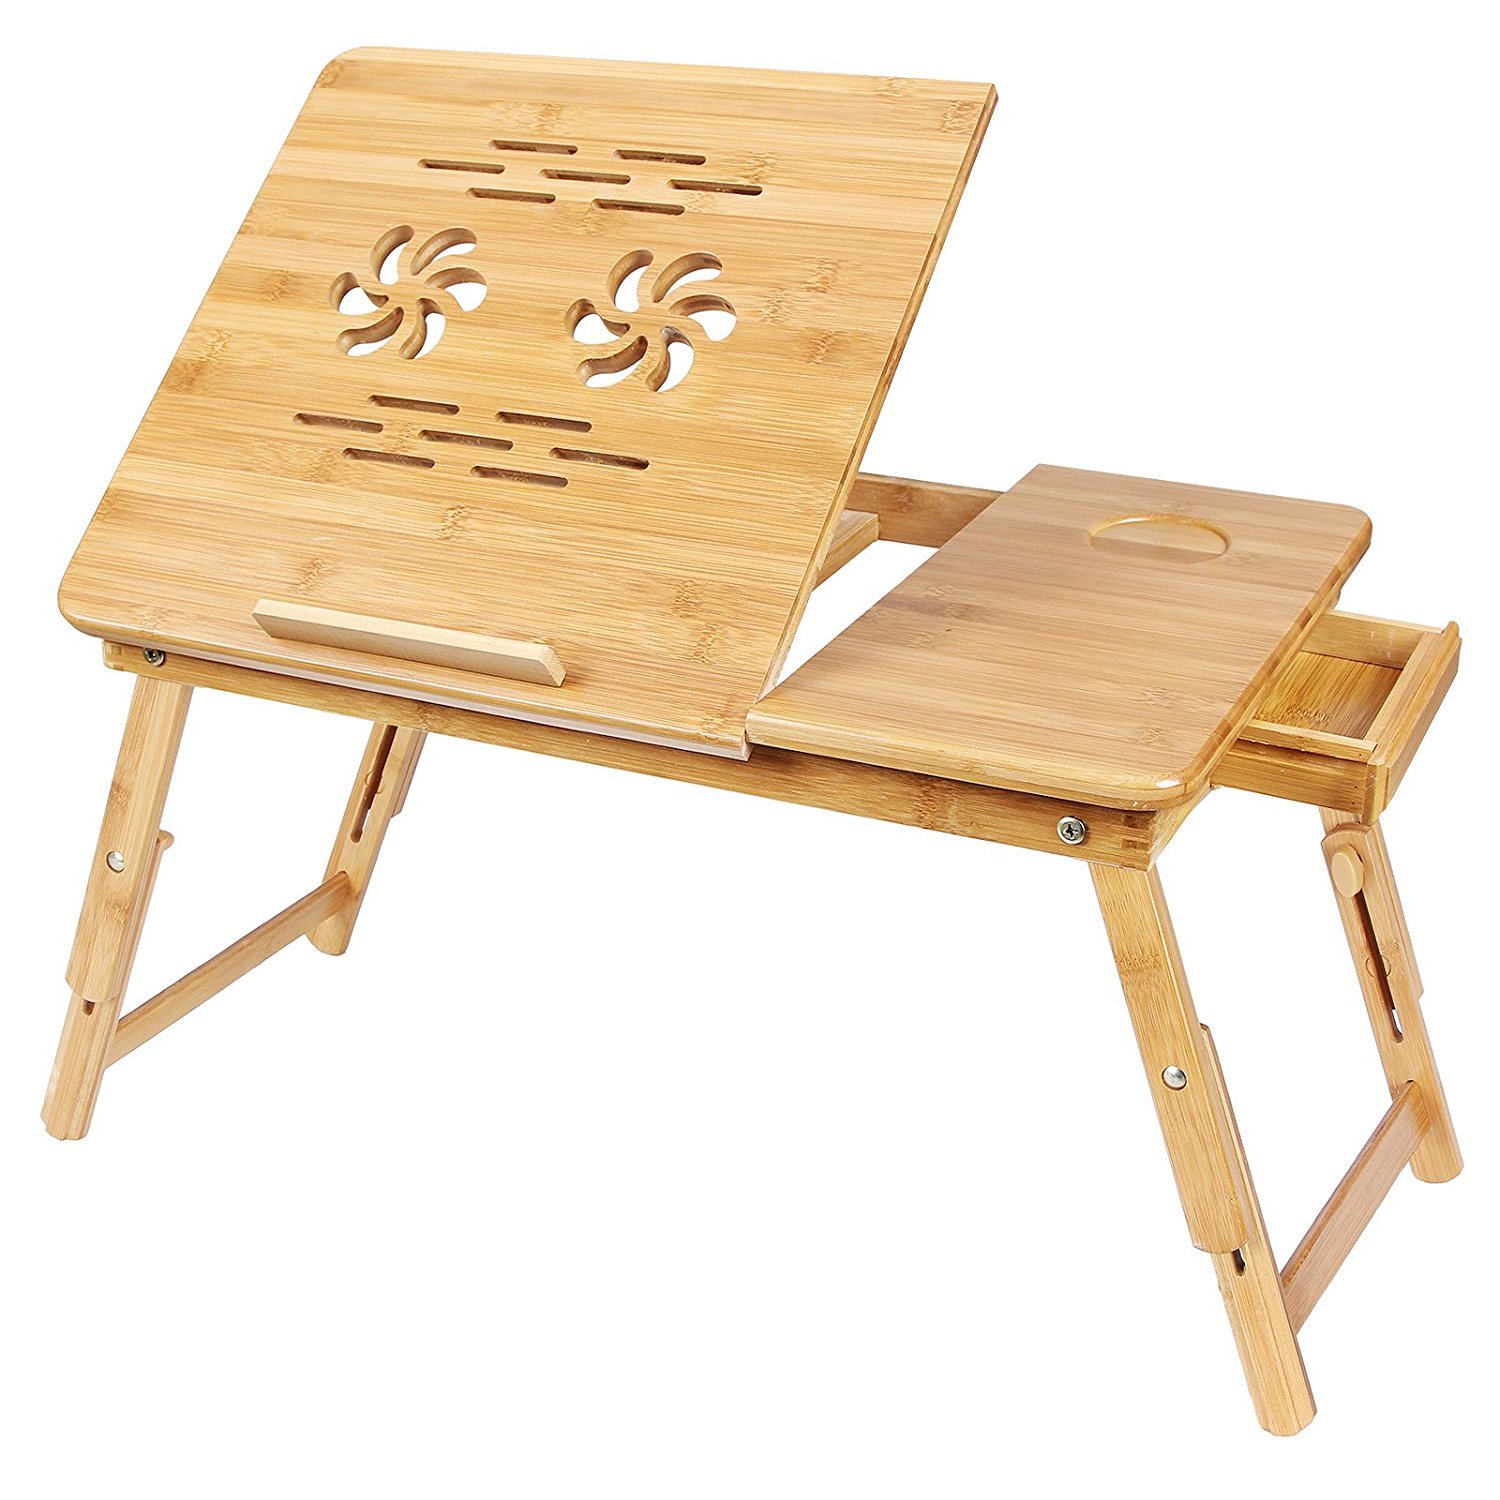 GHK M10 Portable Lapdesk Bamboo Wood Foldable Laptop Table Multipurpose Writing,Working,Eating,Reading Height Adjustable